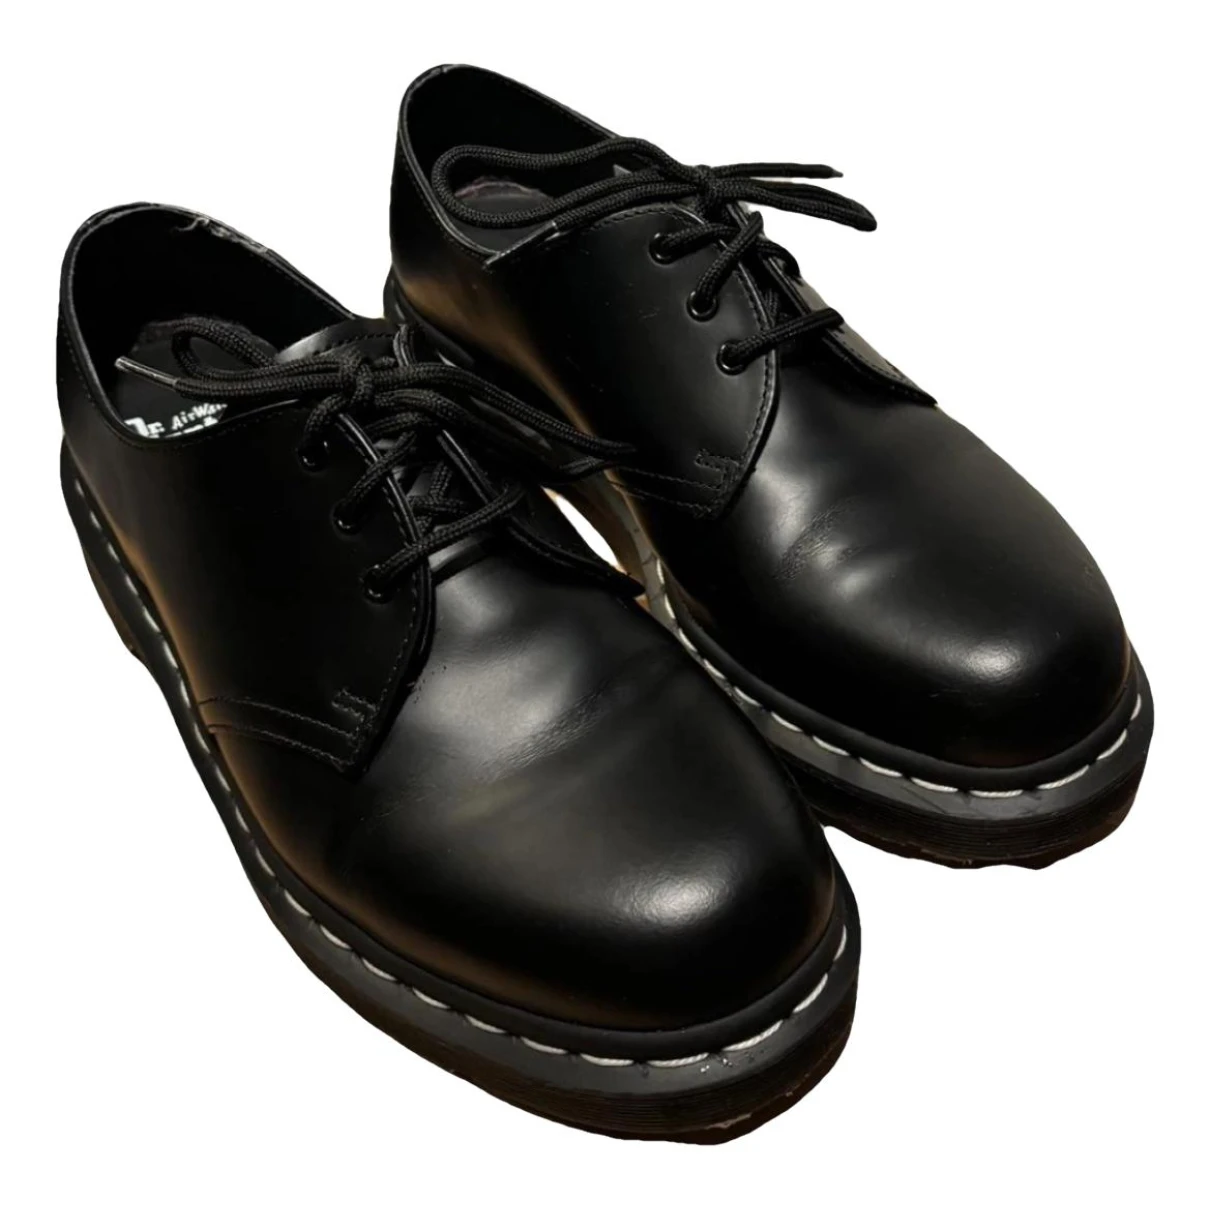 Pre-owned Dr. Martens' 1461 (3 Eye) Leather Lace Ups In Black